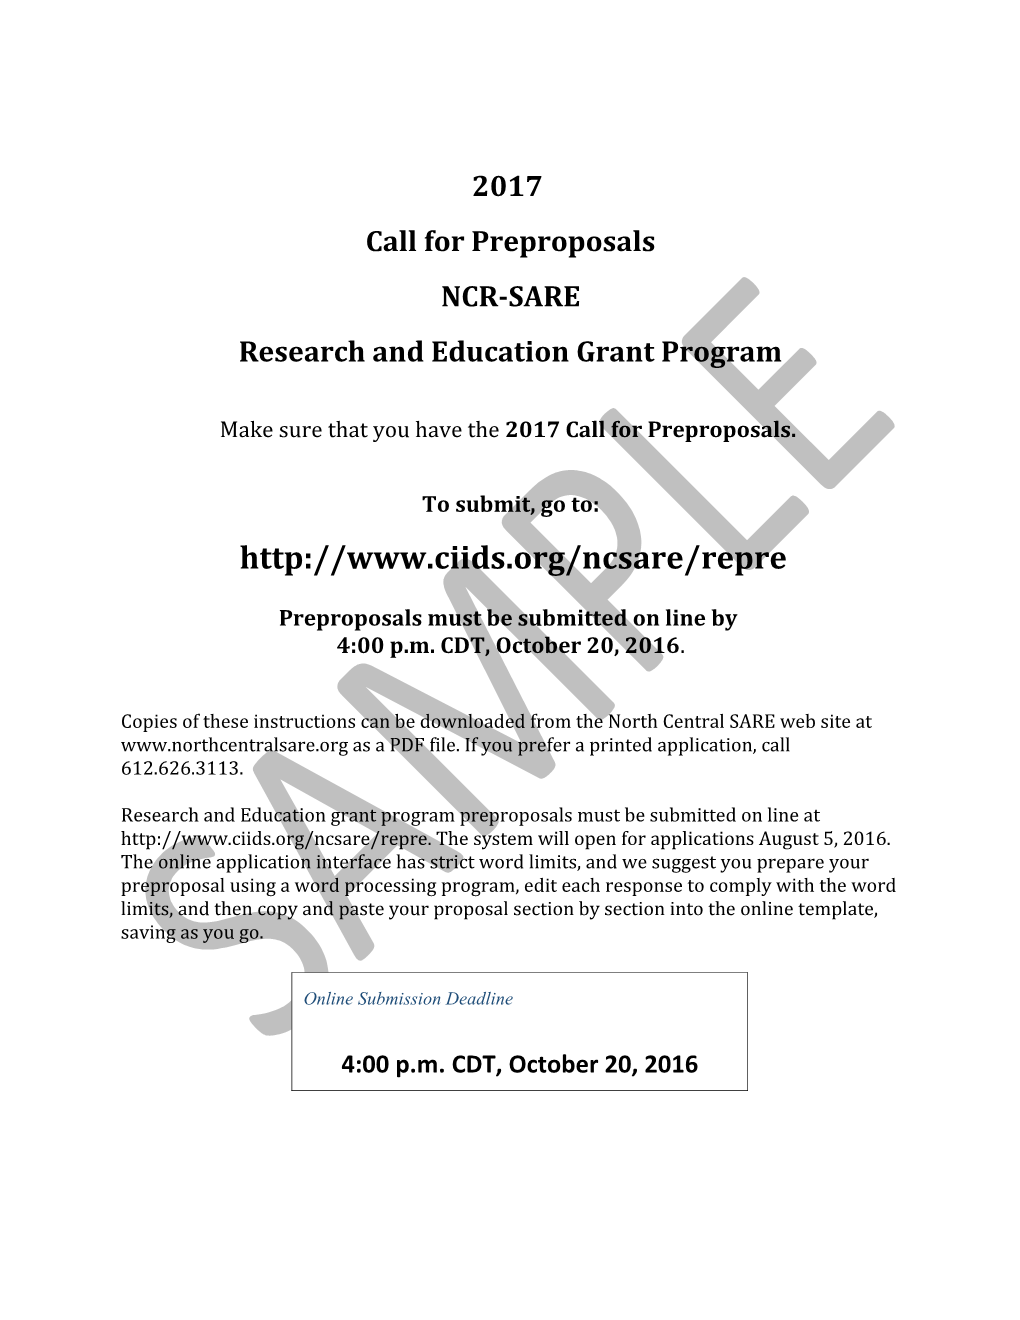 Research and Education Grant Program